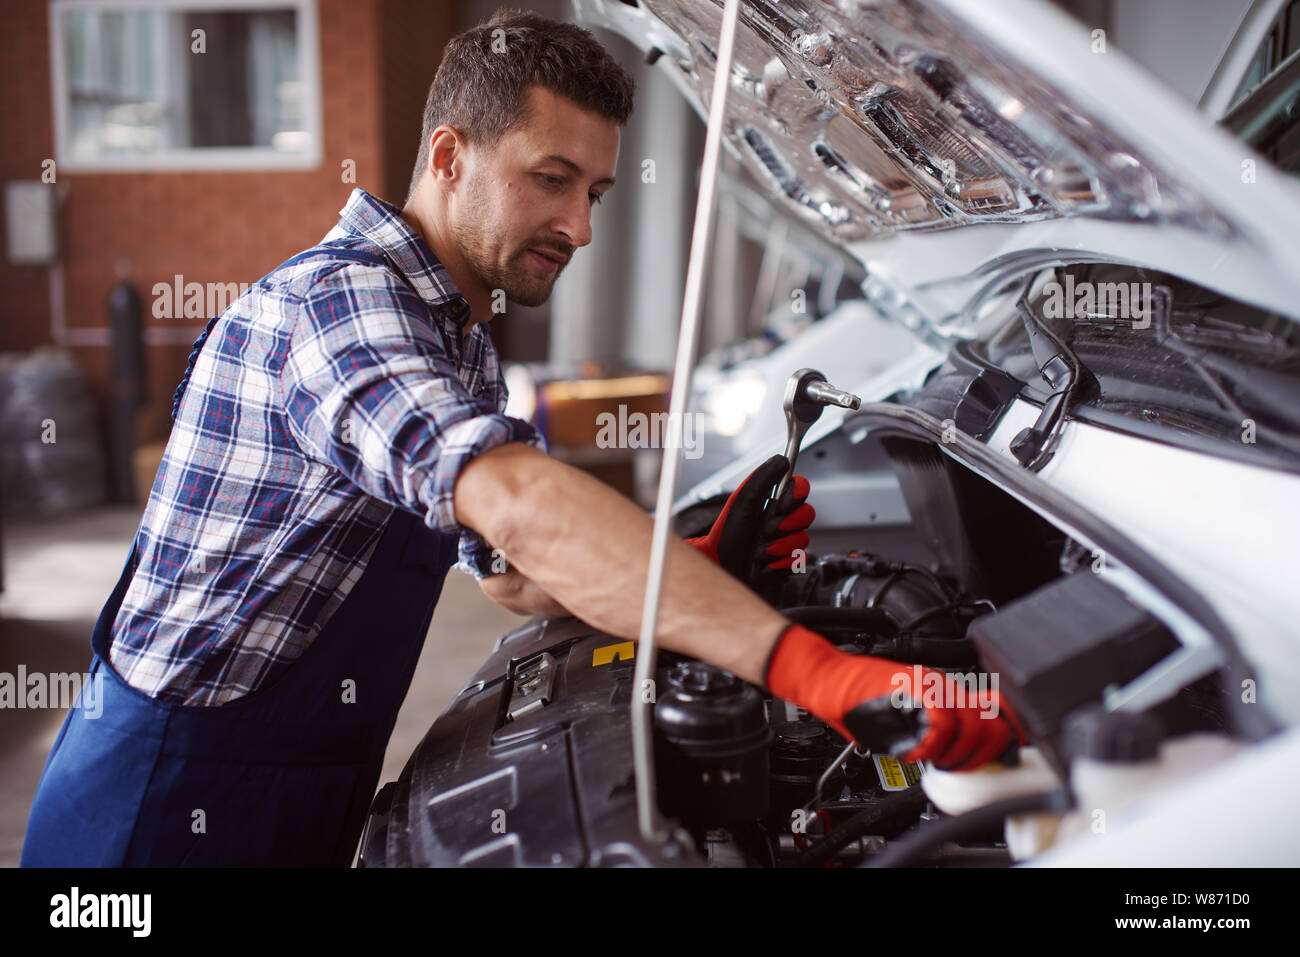 Man works at the car service under the fixation of a broken car engine. Stock Photo